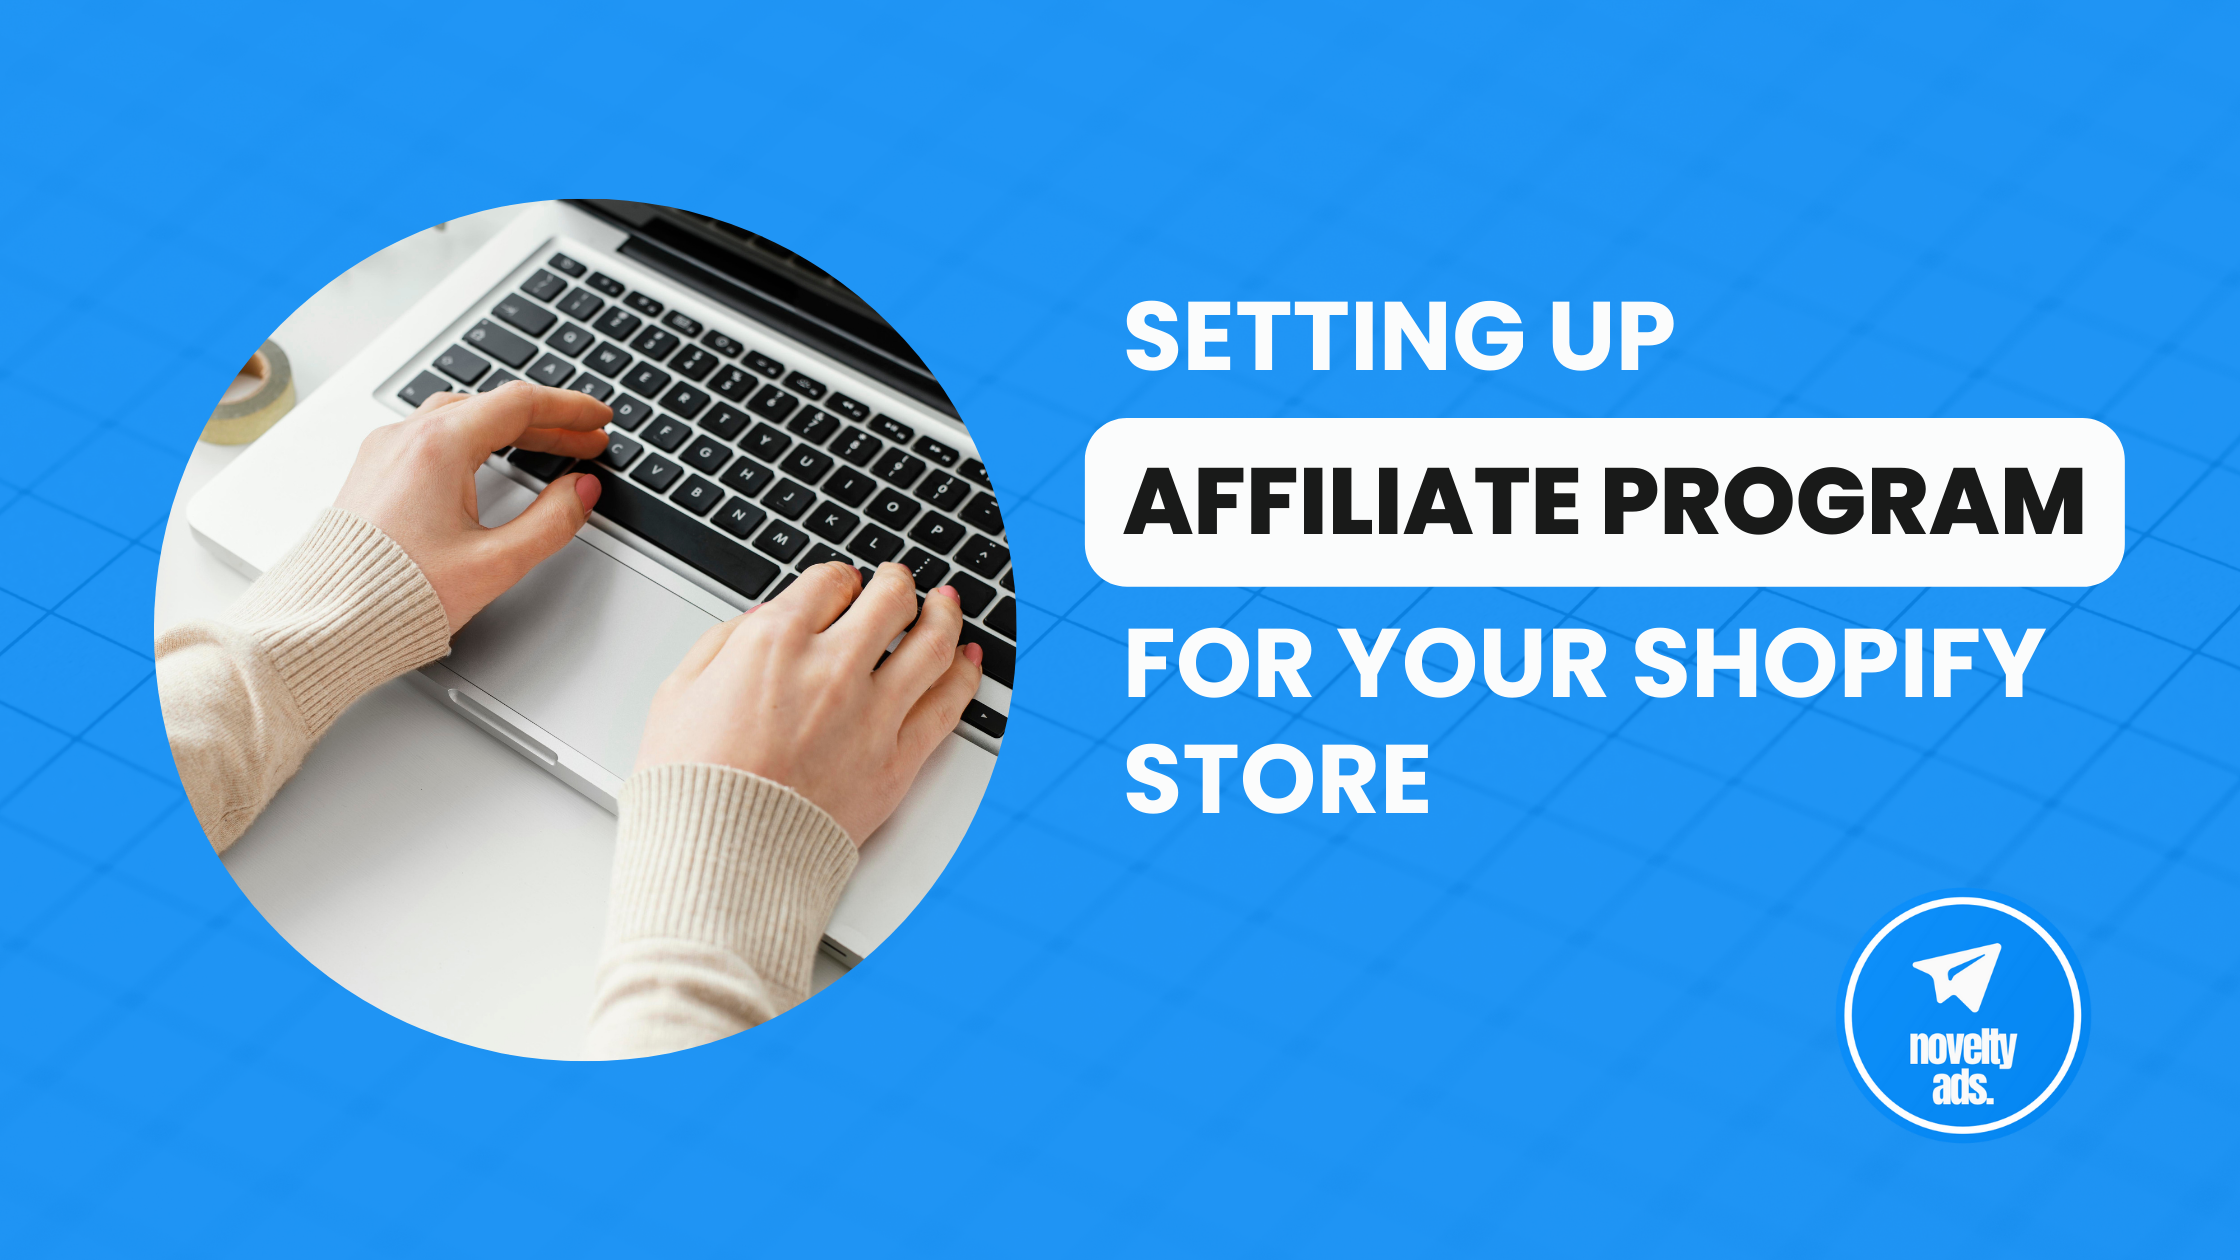 How to setup Affiliate Program for your shopify Store